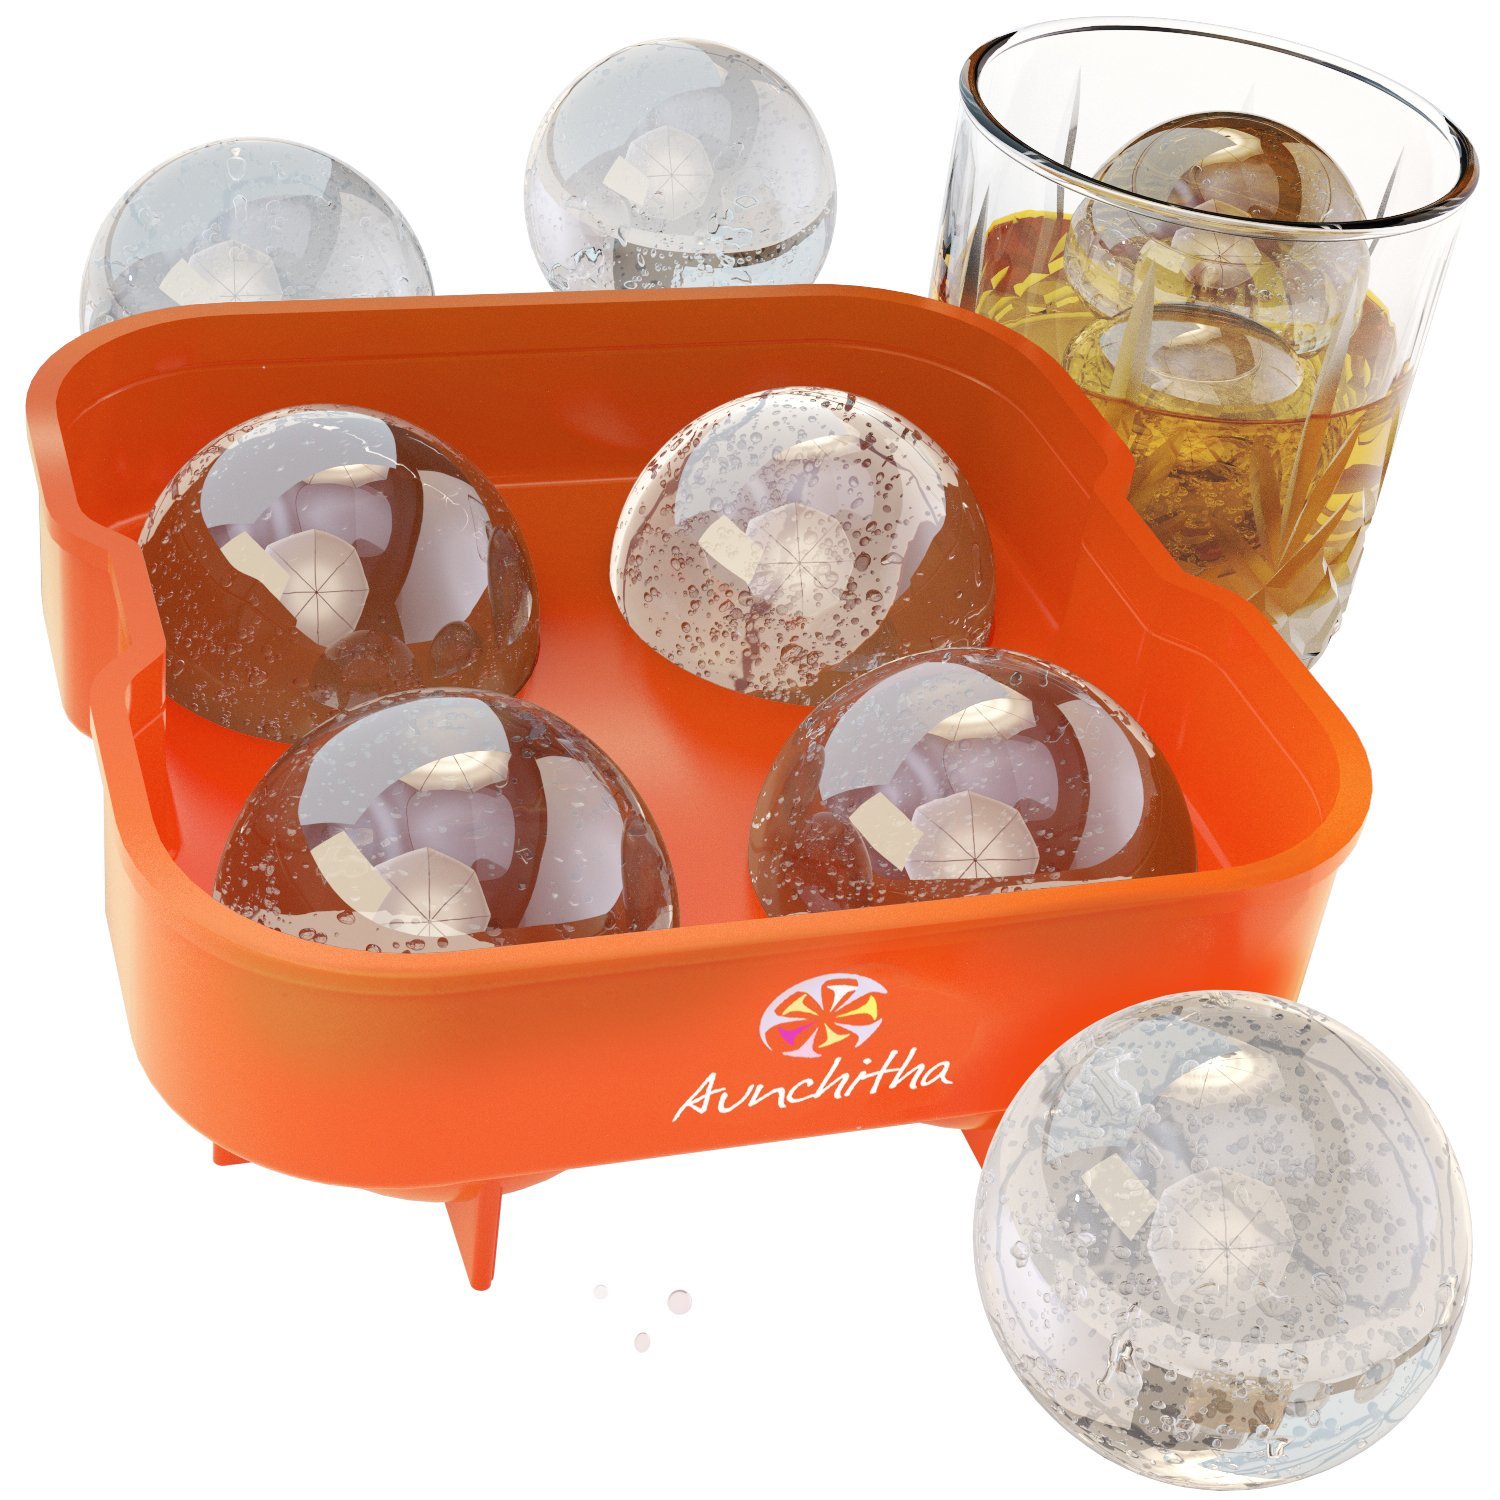 Coupons And Freebies: Ice Ball Maker Mold $1 + Free Shipping With 